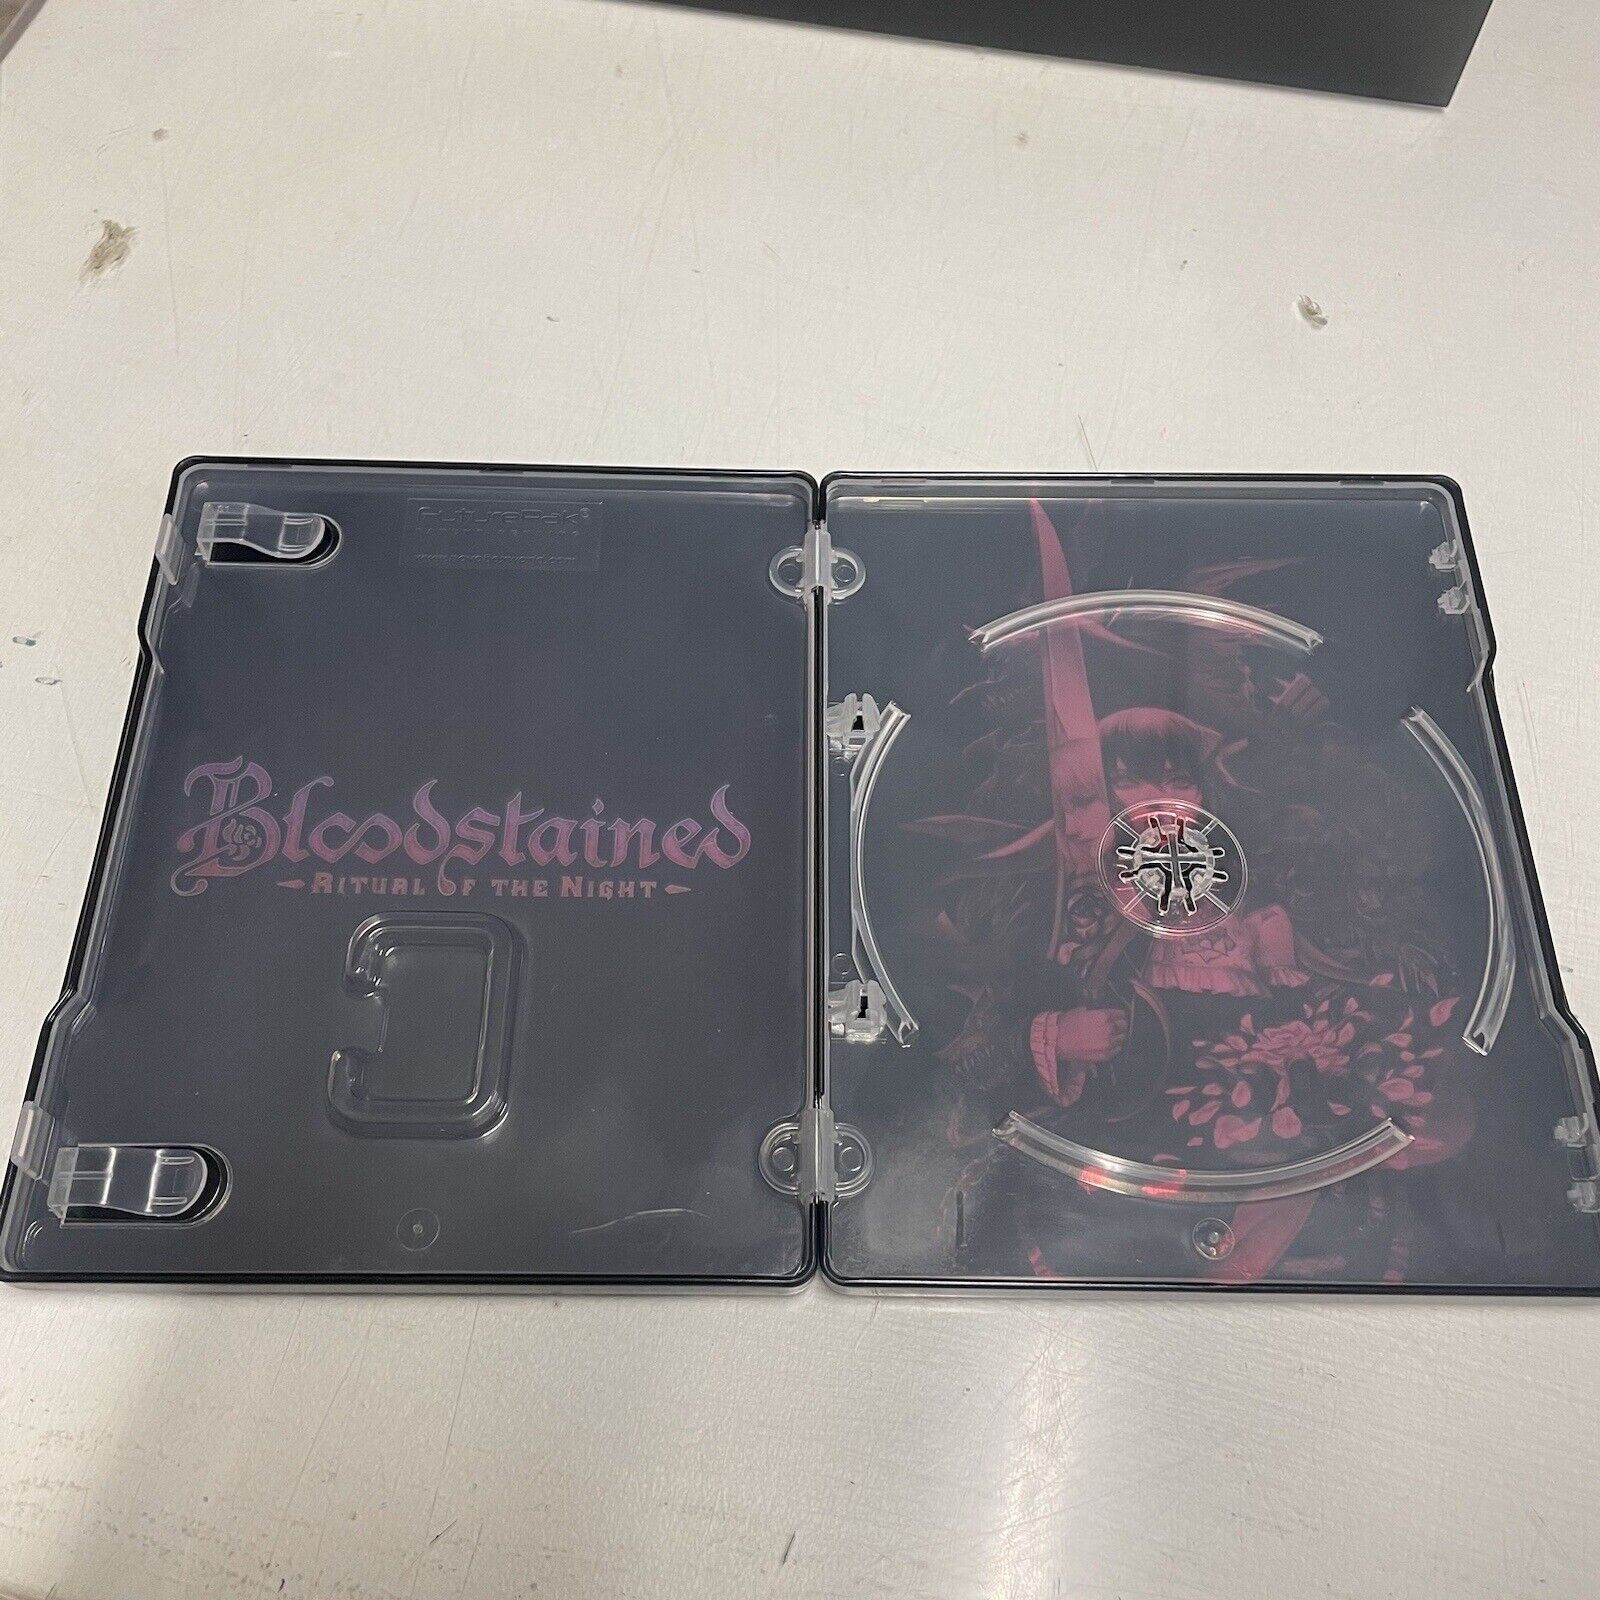 Ps4-Bloodstained-Ritual-Of-The-Night-Steelbook-Limited-Sony-Playstation-NO-GIOCO-145380208707-5